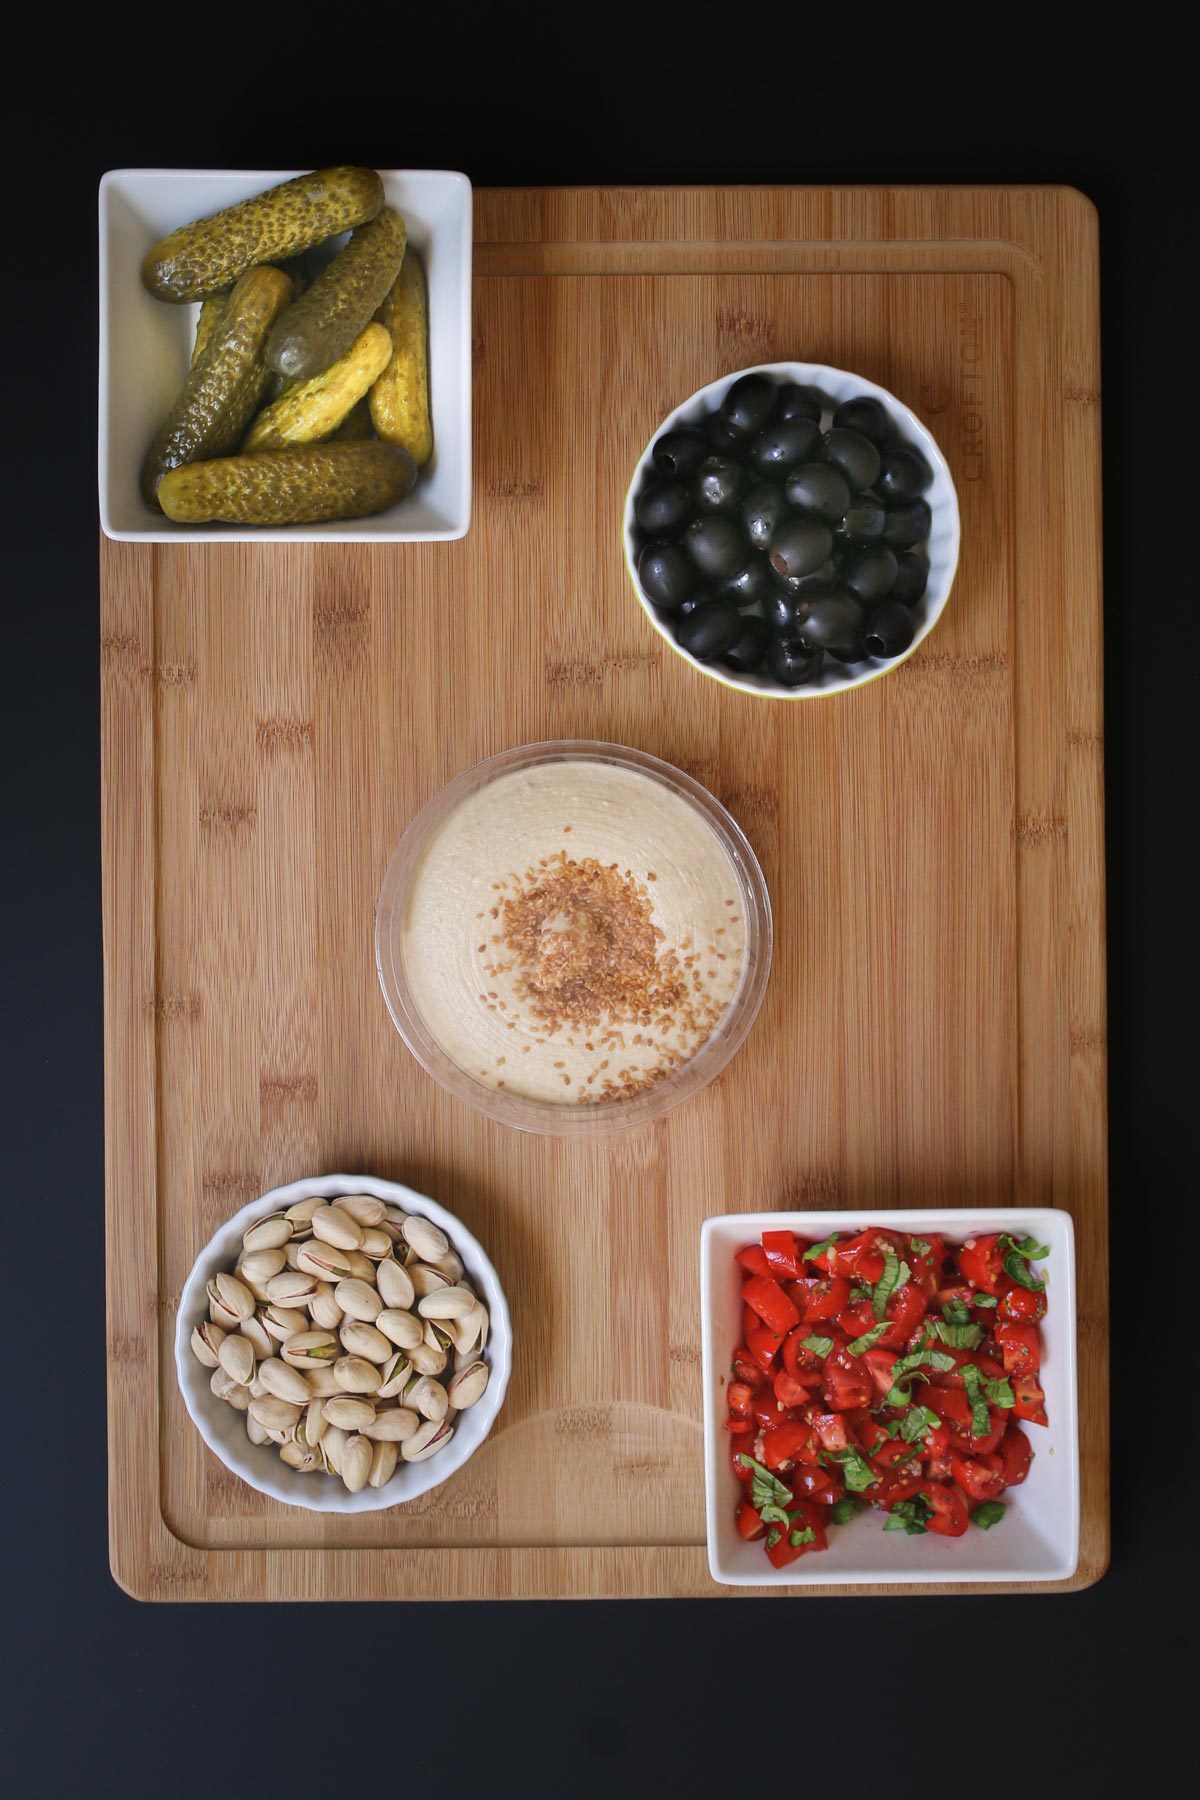 pickles and bruschetta in square bowls, nuts and olives in round ones on a wooden board with a tub of hummus.